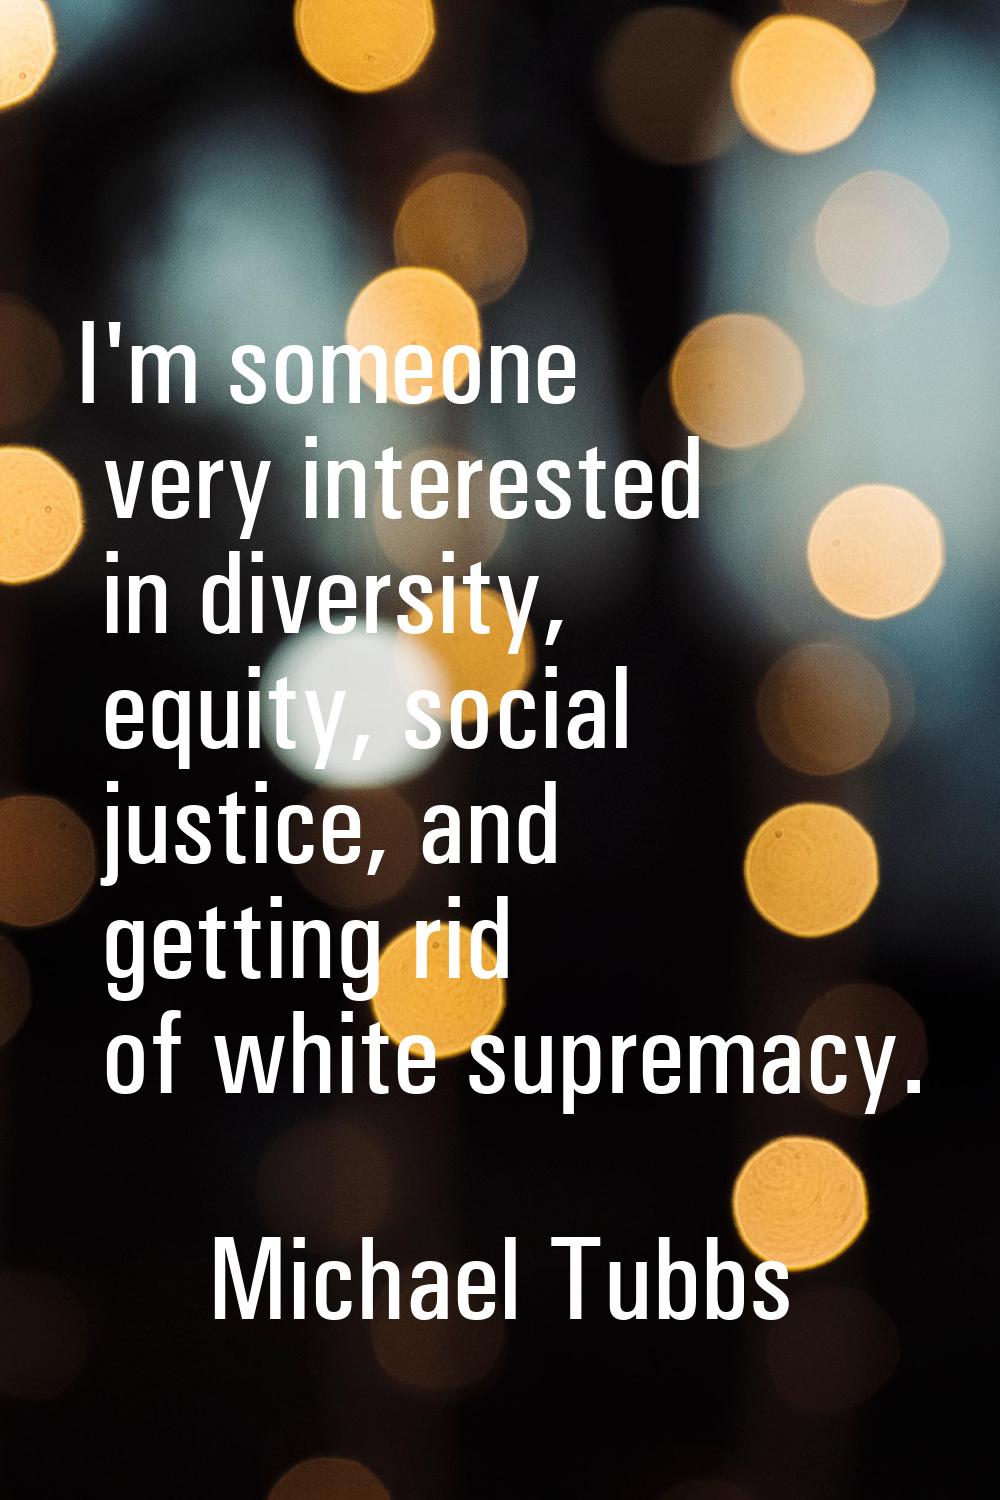 I'm someone very interested in diversity, equity, social justice, and getting rid of white supremac